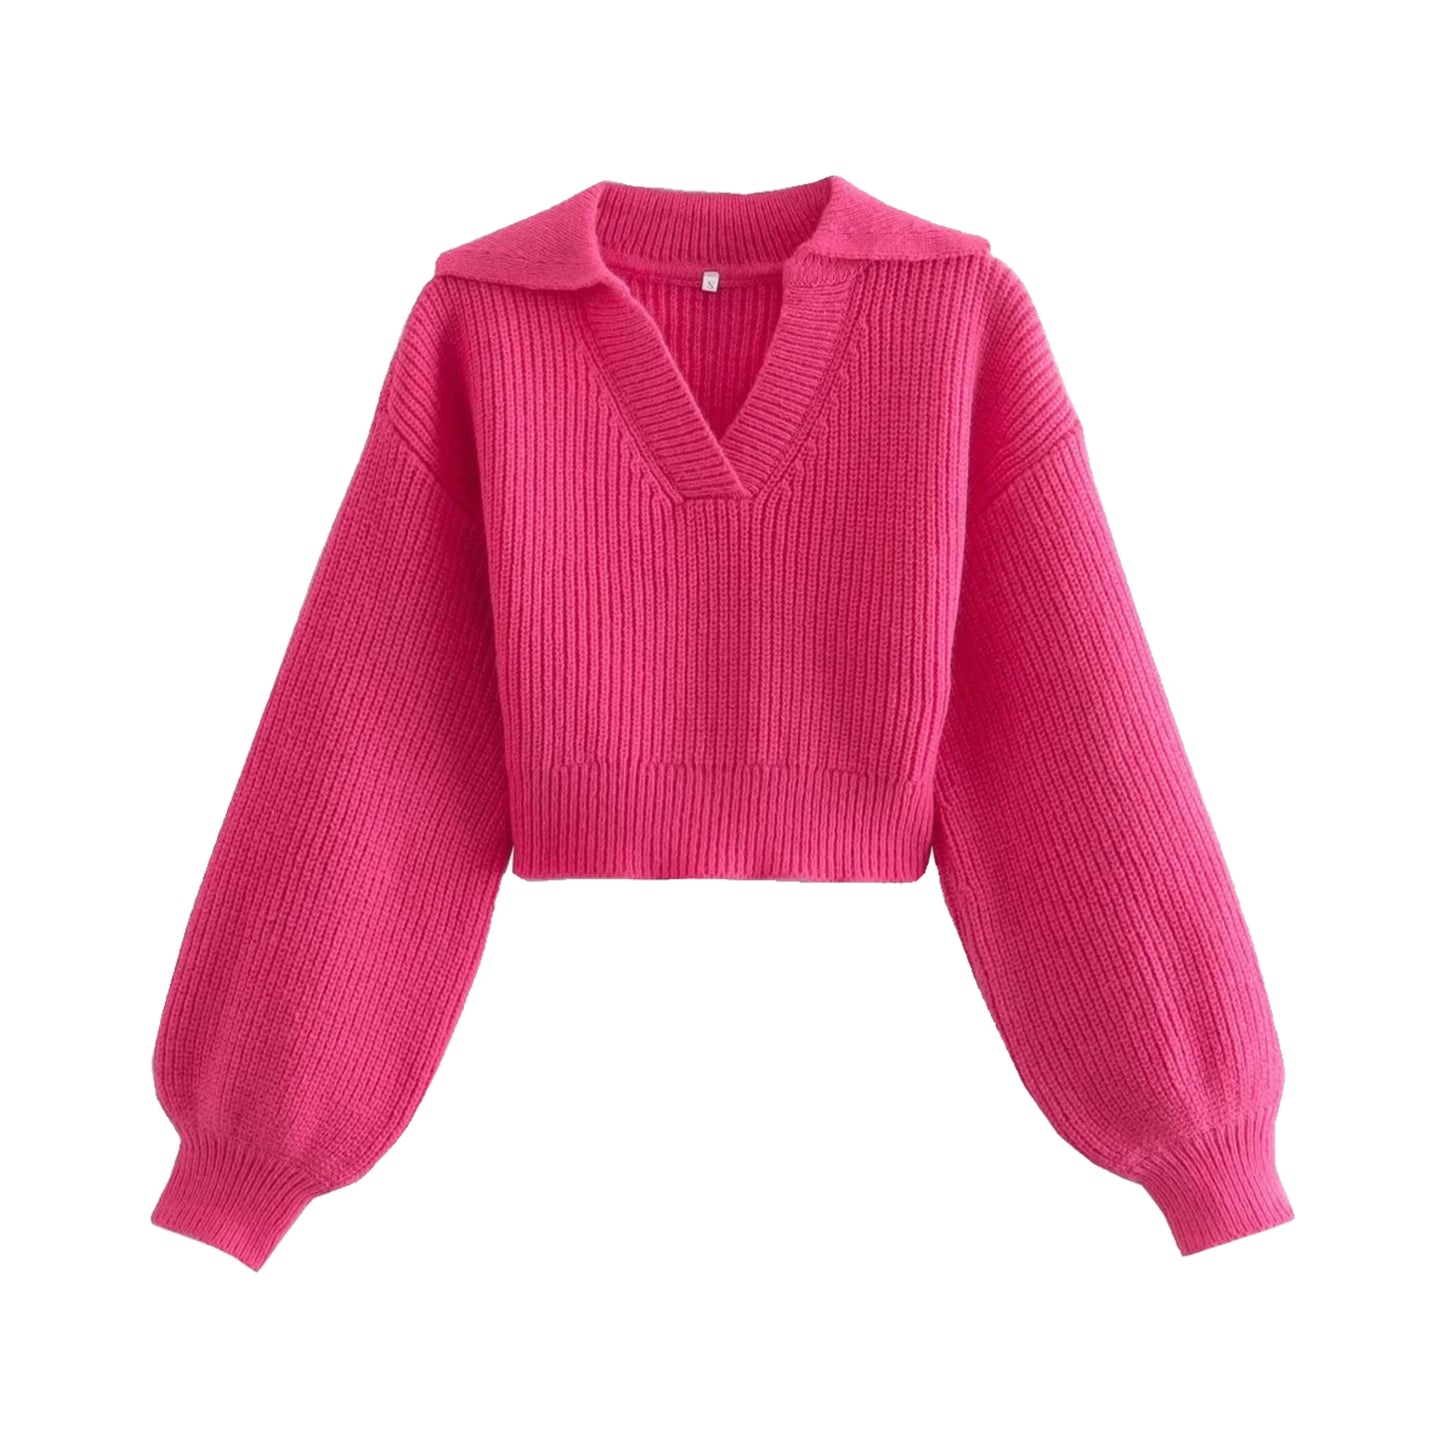 Dark Pink Oversized Knit Cropped Pullover Sweater